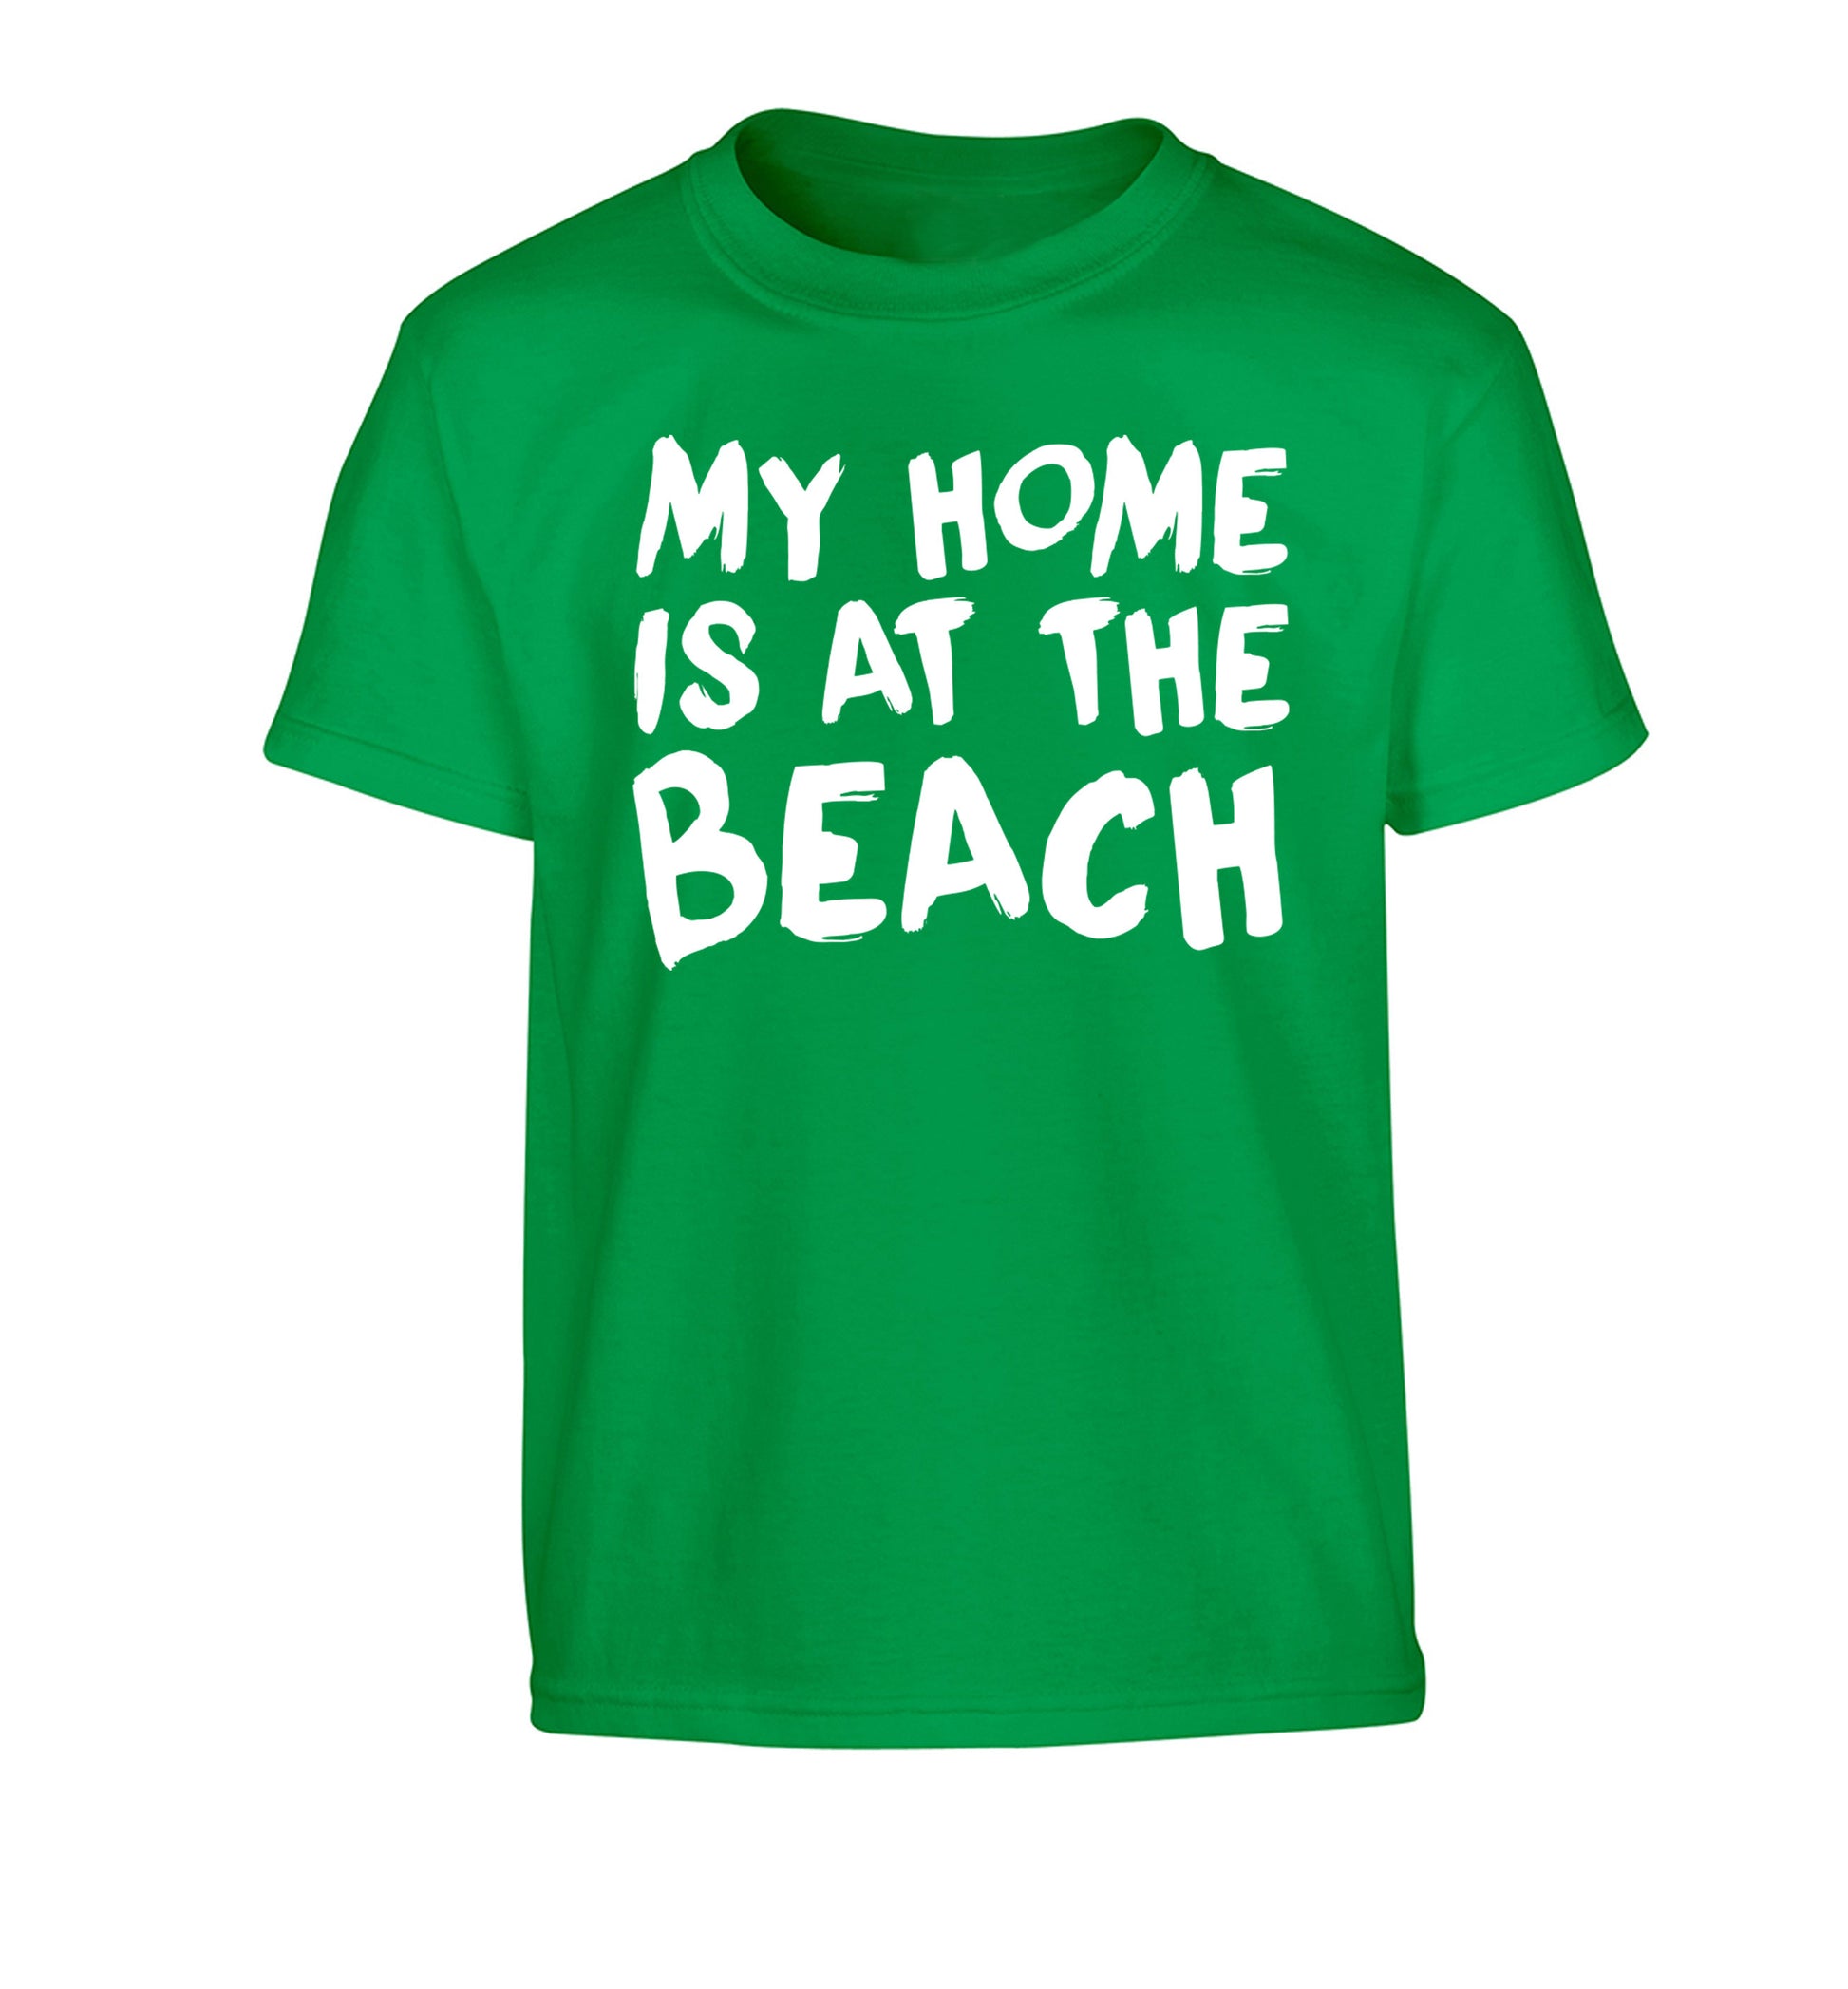 My home is at the beach Children's green Tshirt 12-14 Years